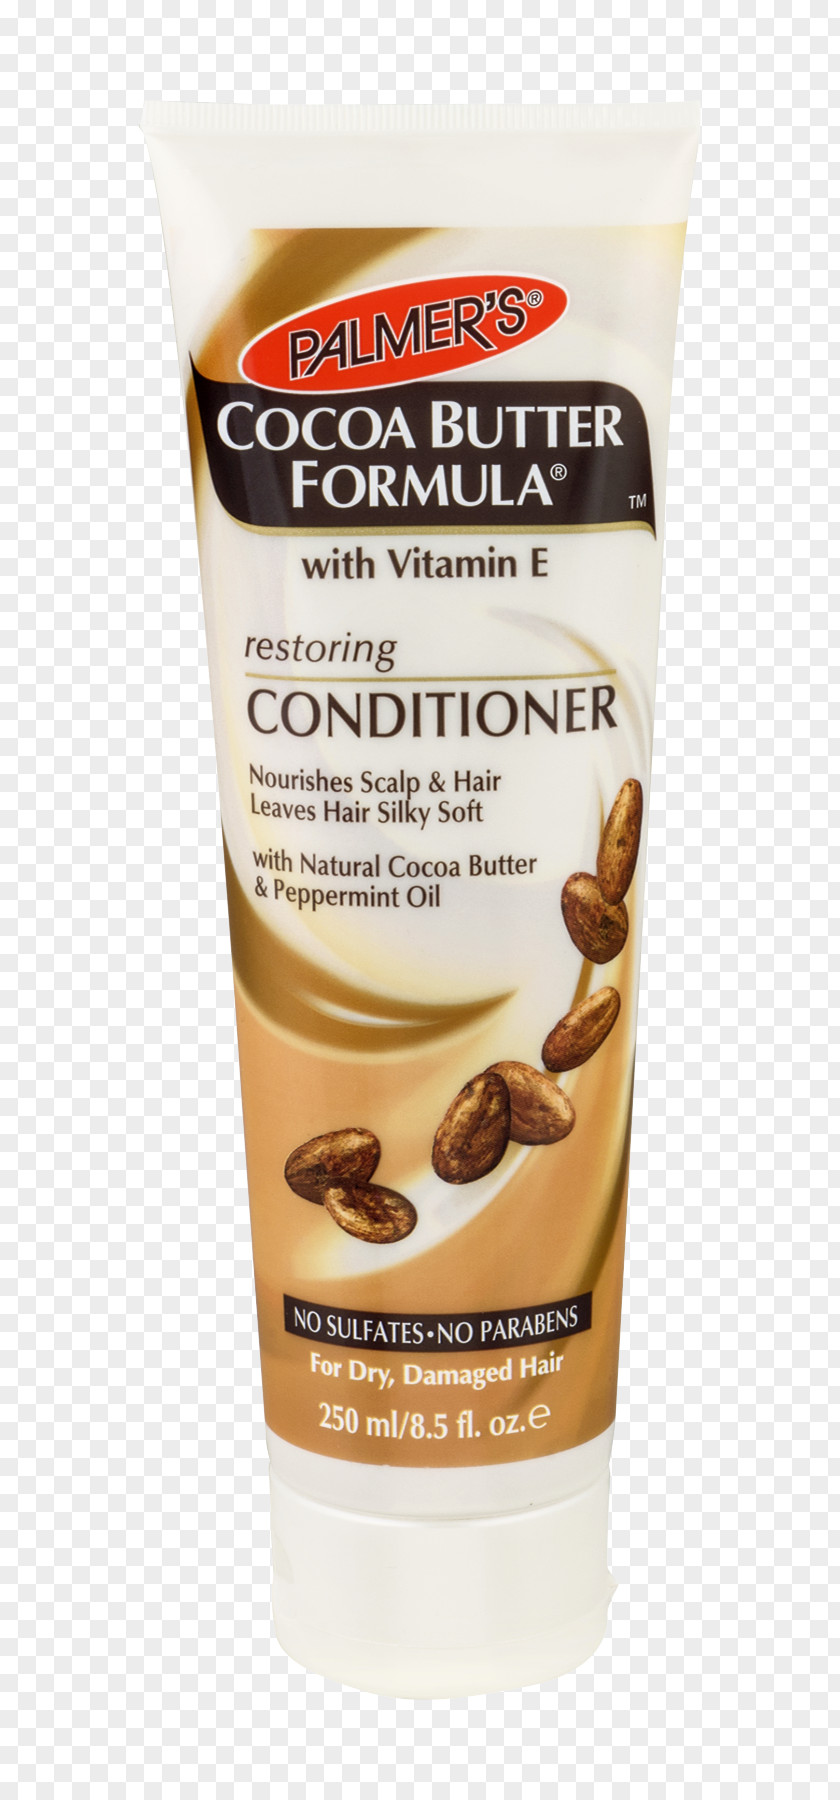 Lotion Palmer's Cocoa Butter Formula Concentrated Cream Moisture Rich Shampoo Hair Care PNG